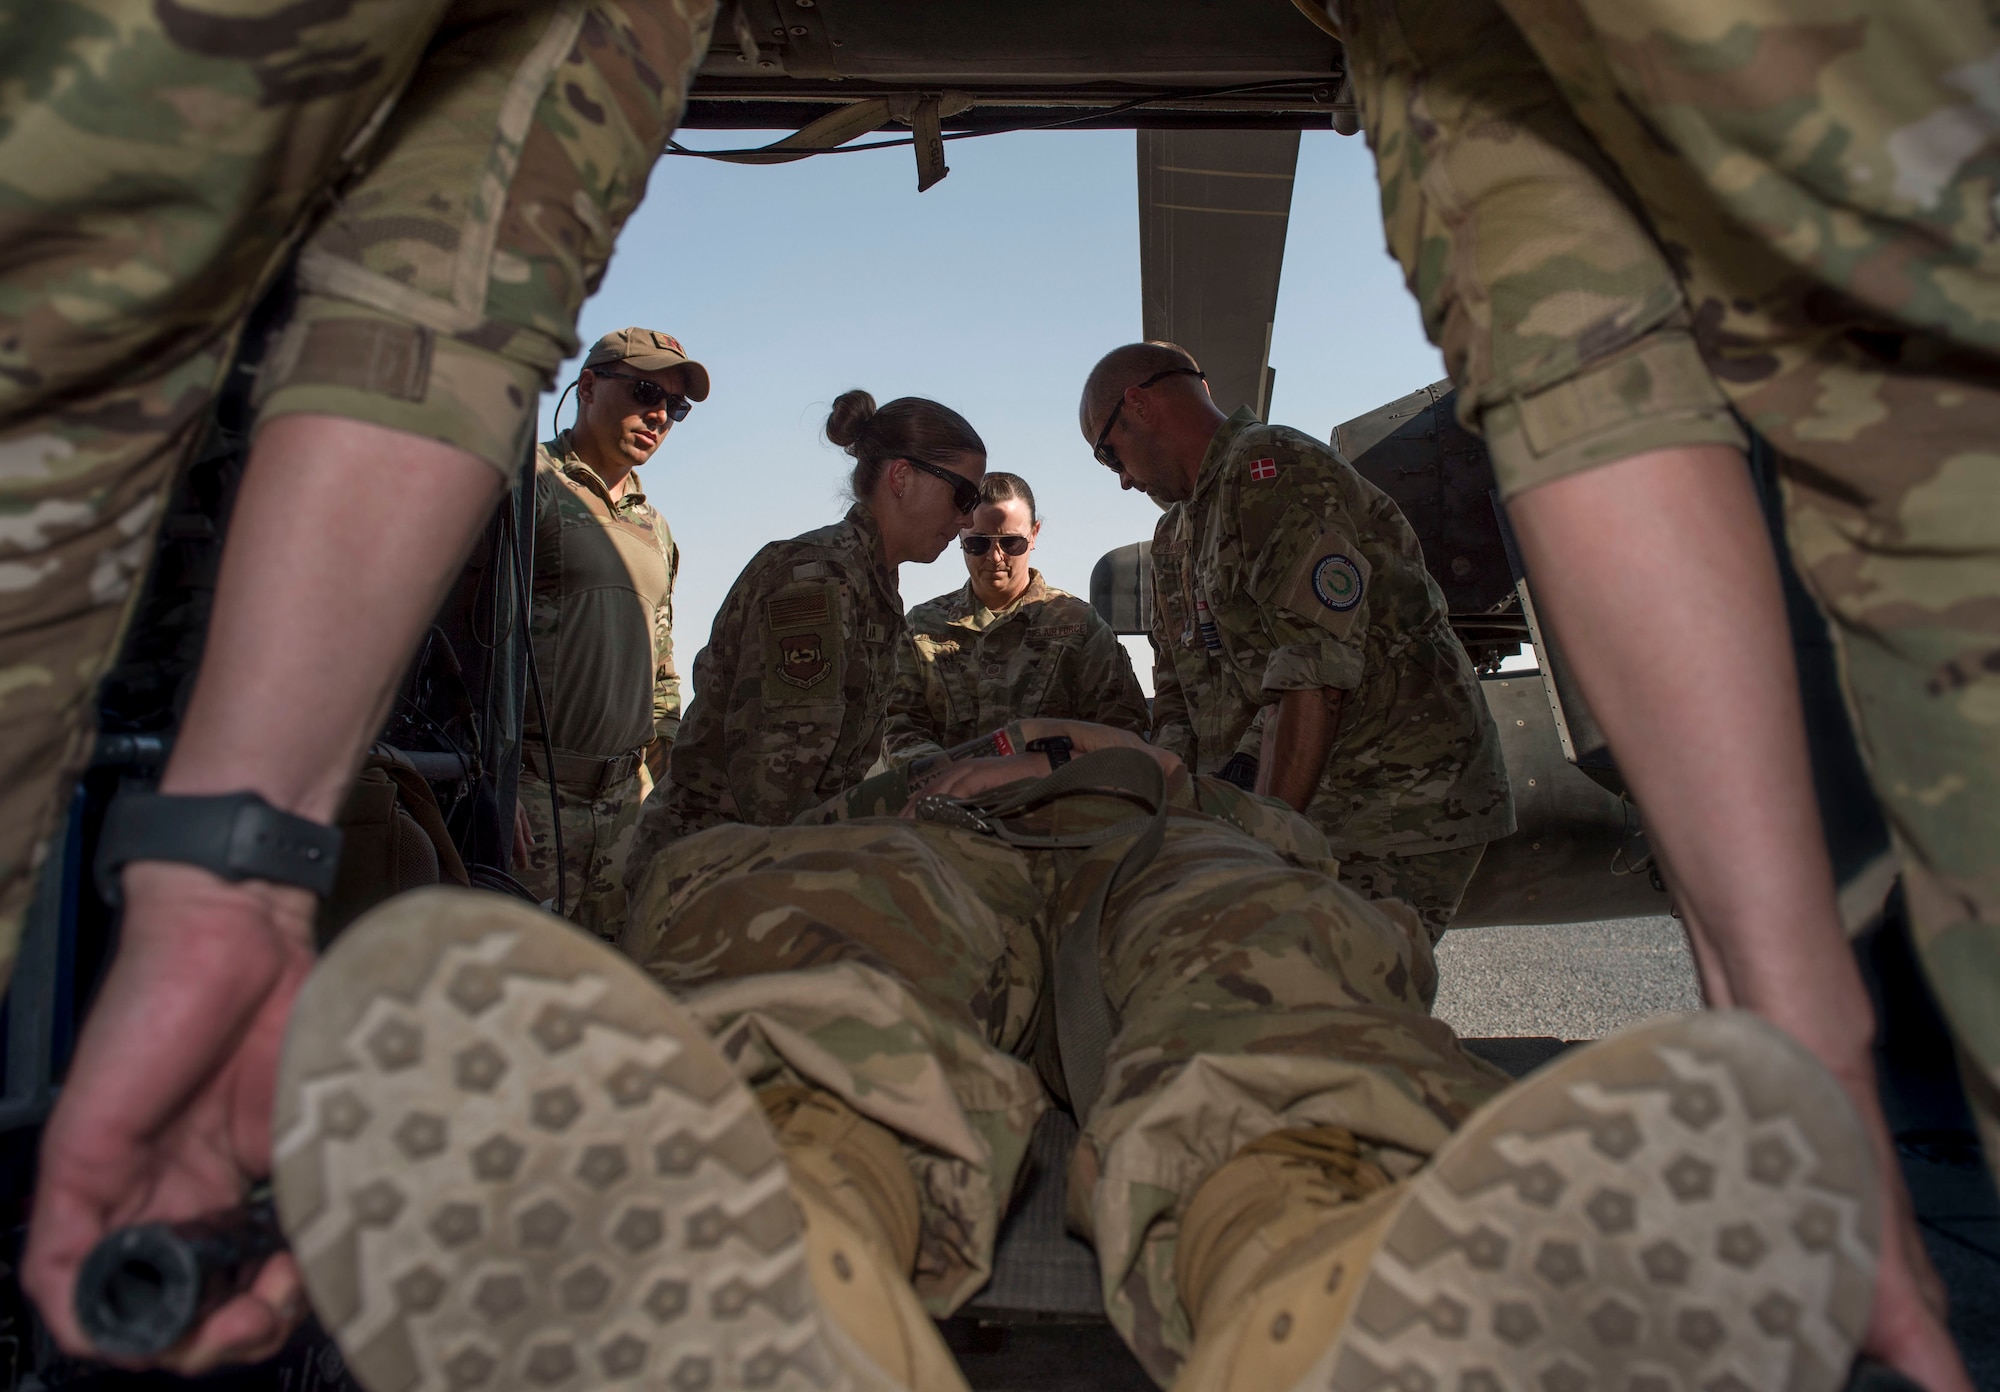 Medical personnel load a patient onto a UH-60 Black Hawk helicopter during a medical evacuation training exercise at Ali Al Salem Air Base, Kuwait, Oct. 27, 2020.